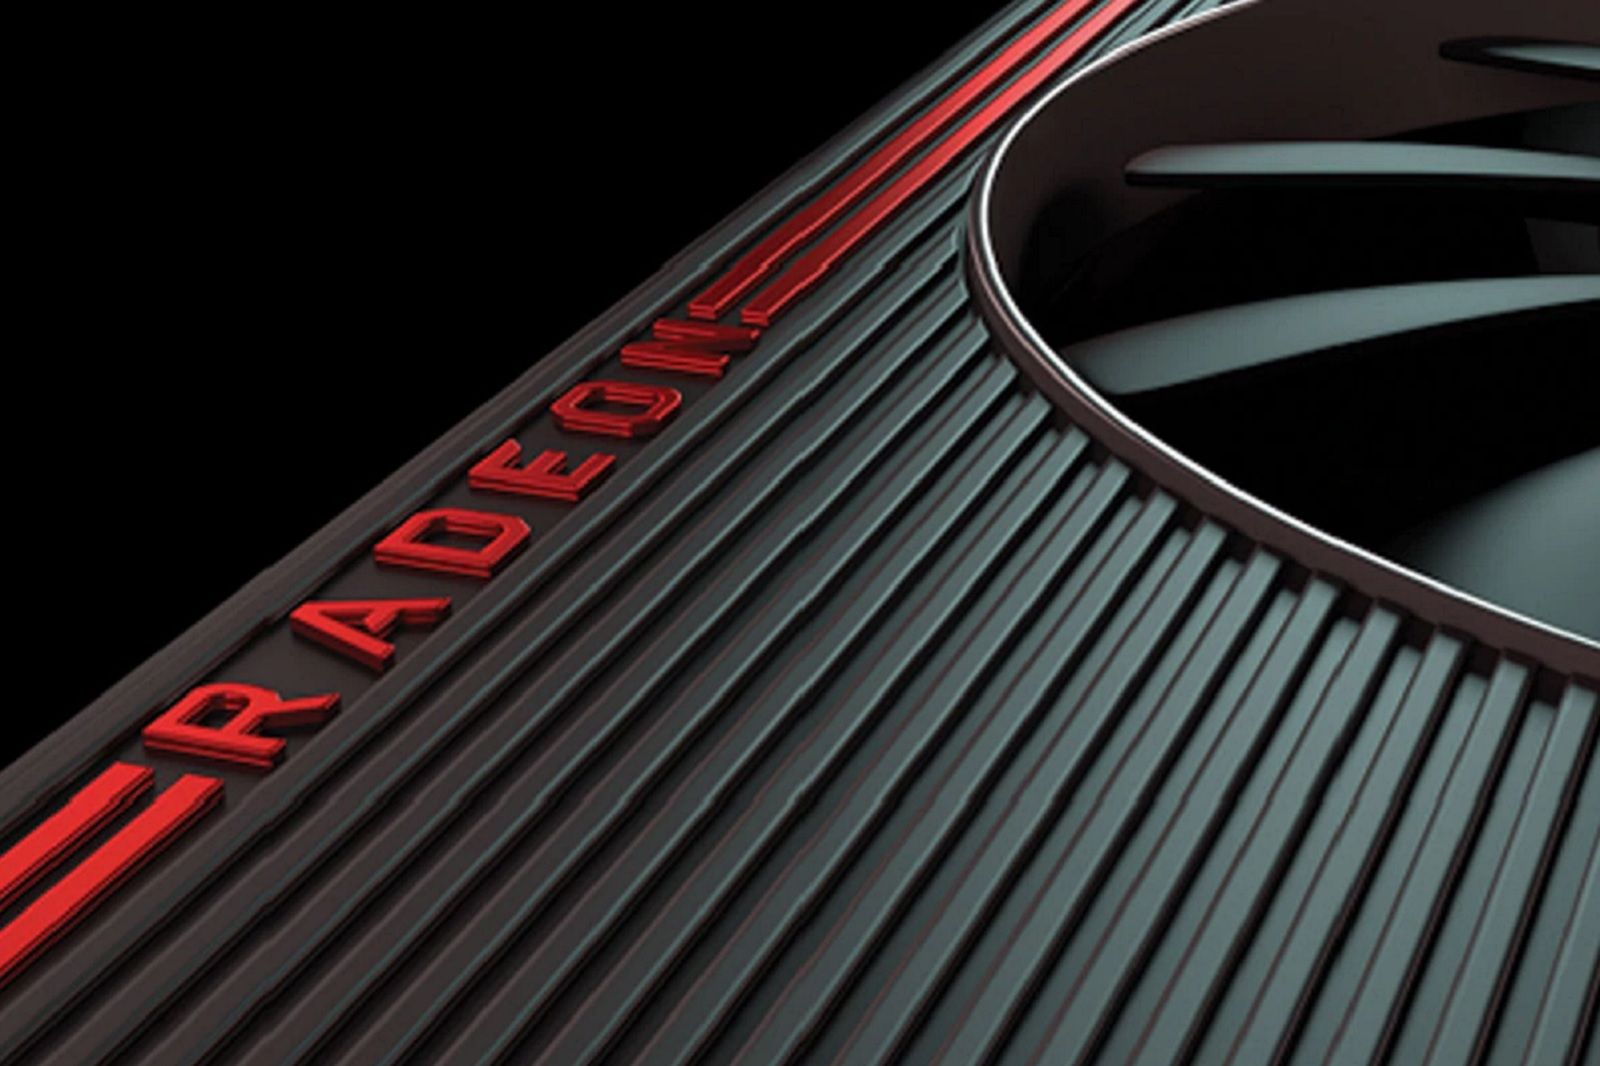 AMD is shaking things up with the Radeon RX 5600 XT graphics card image 1